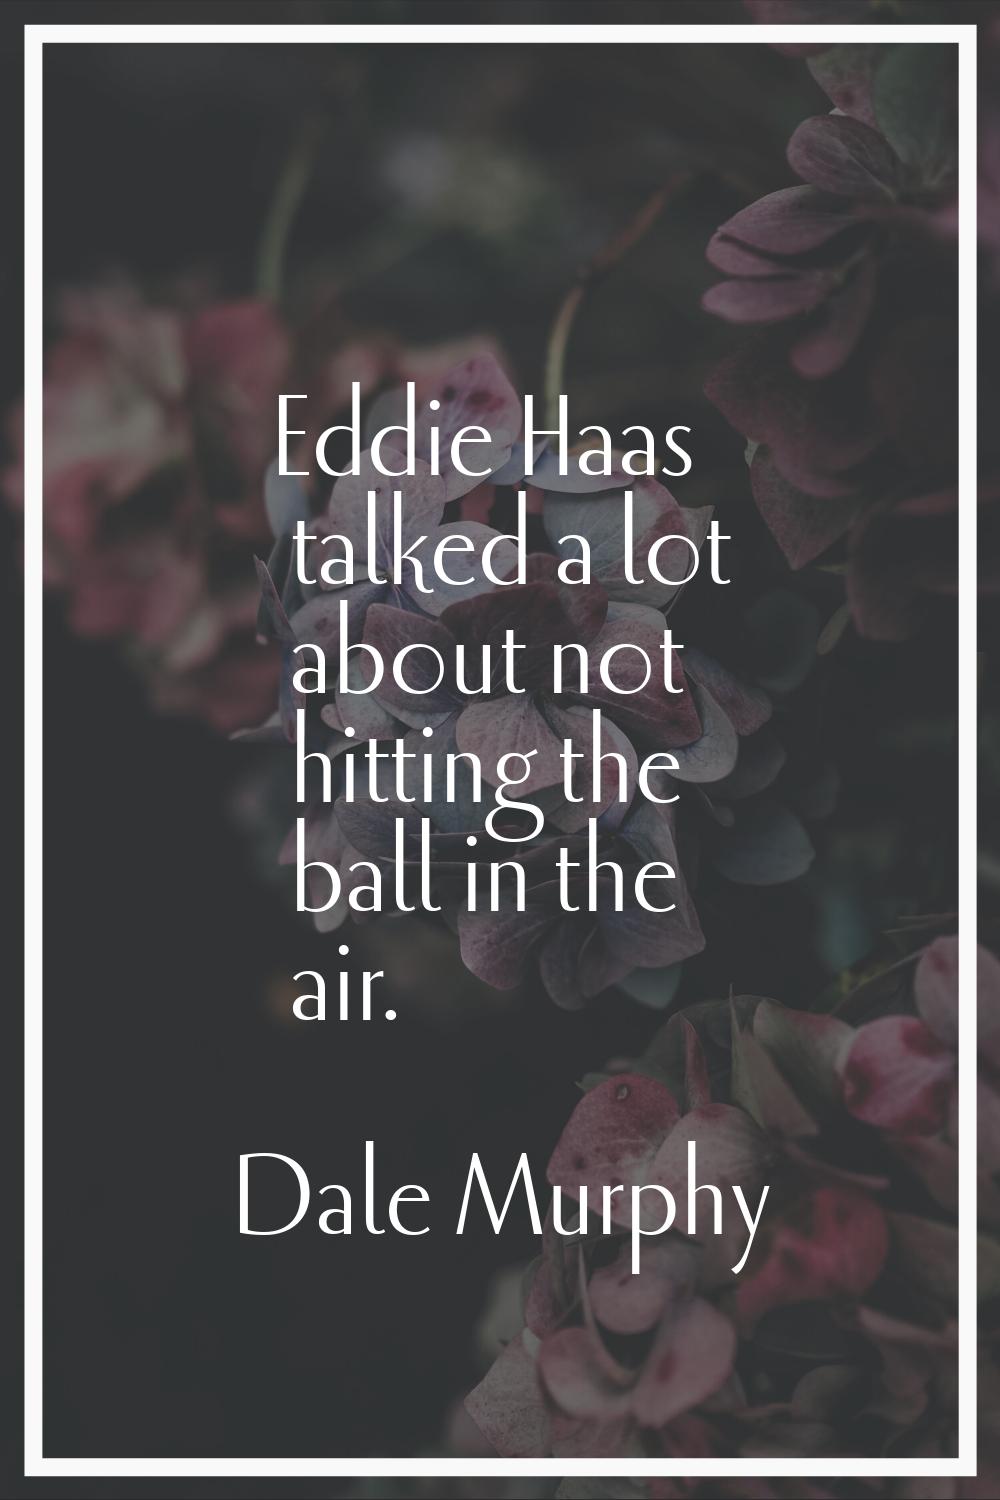 Eddie Haas talked a lot about not hitting the ball in the air.